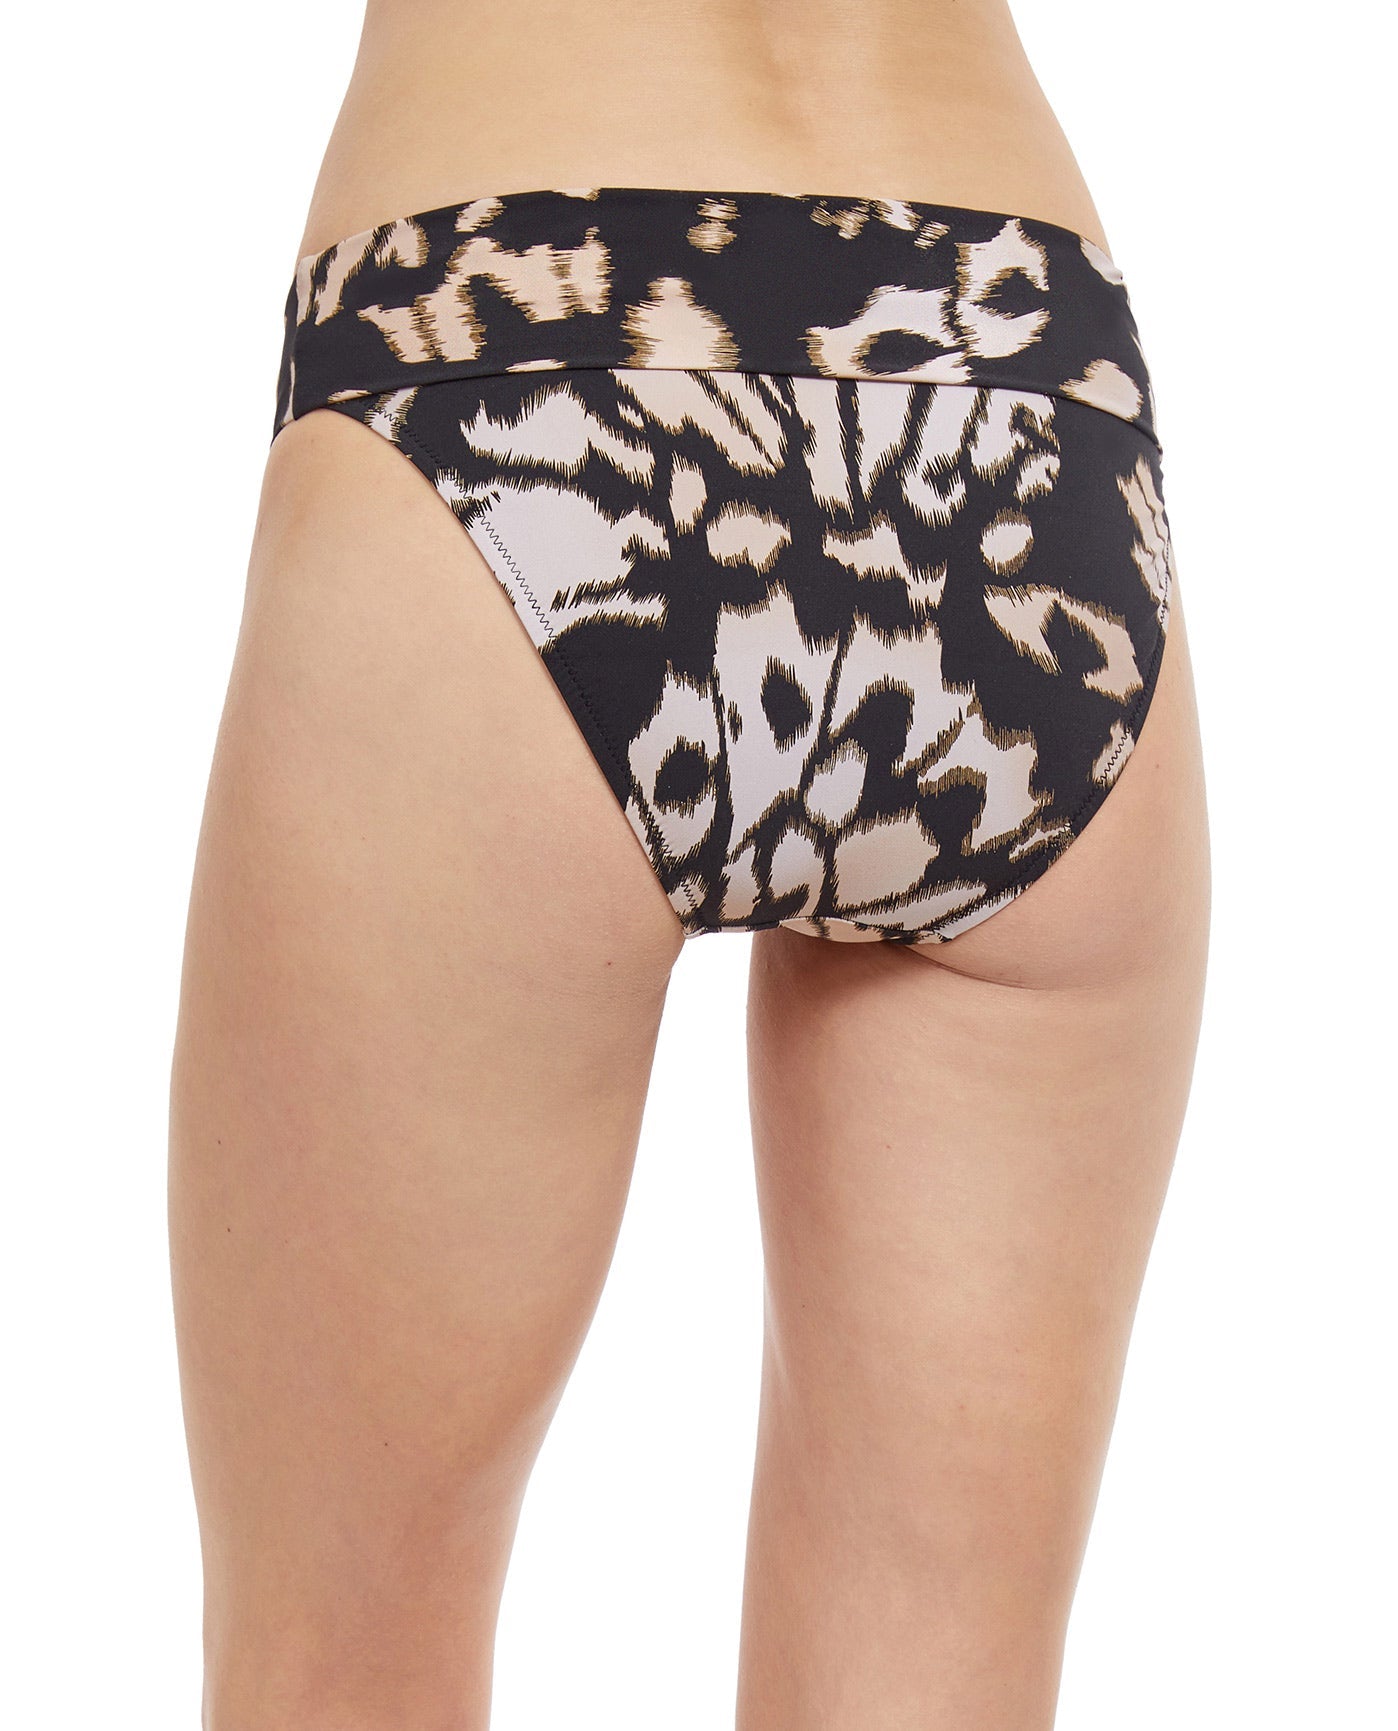 Back View Of Gottex Essentials Miss Butterfly Transformable Foldover Bikini Bottom | Gottex Miss Butterfly Brown